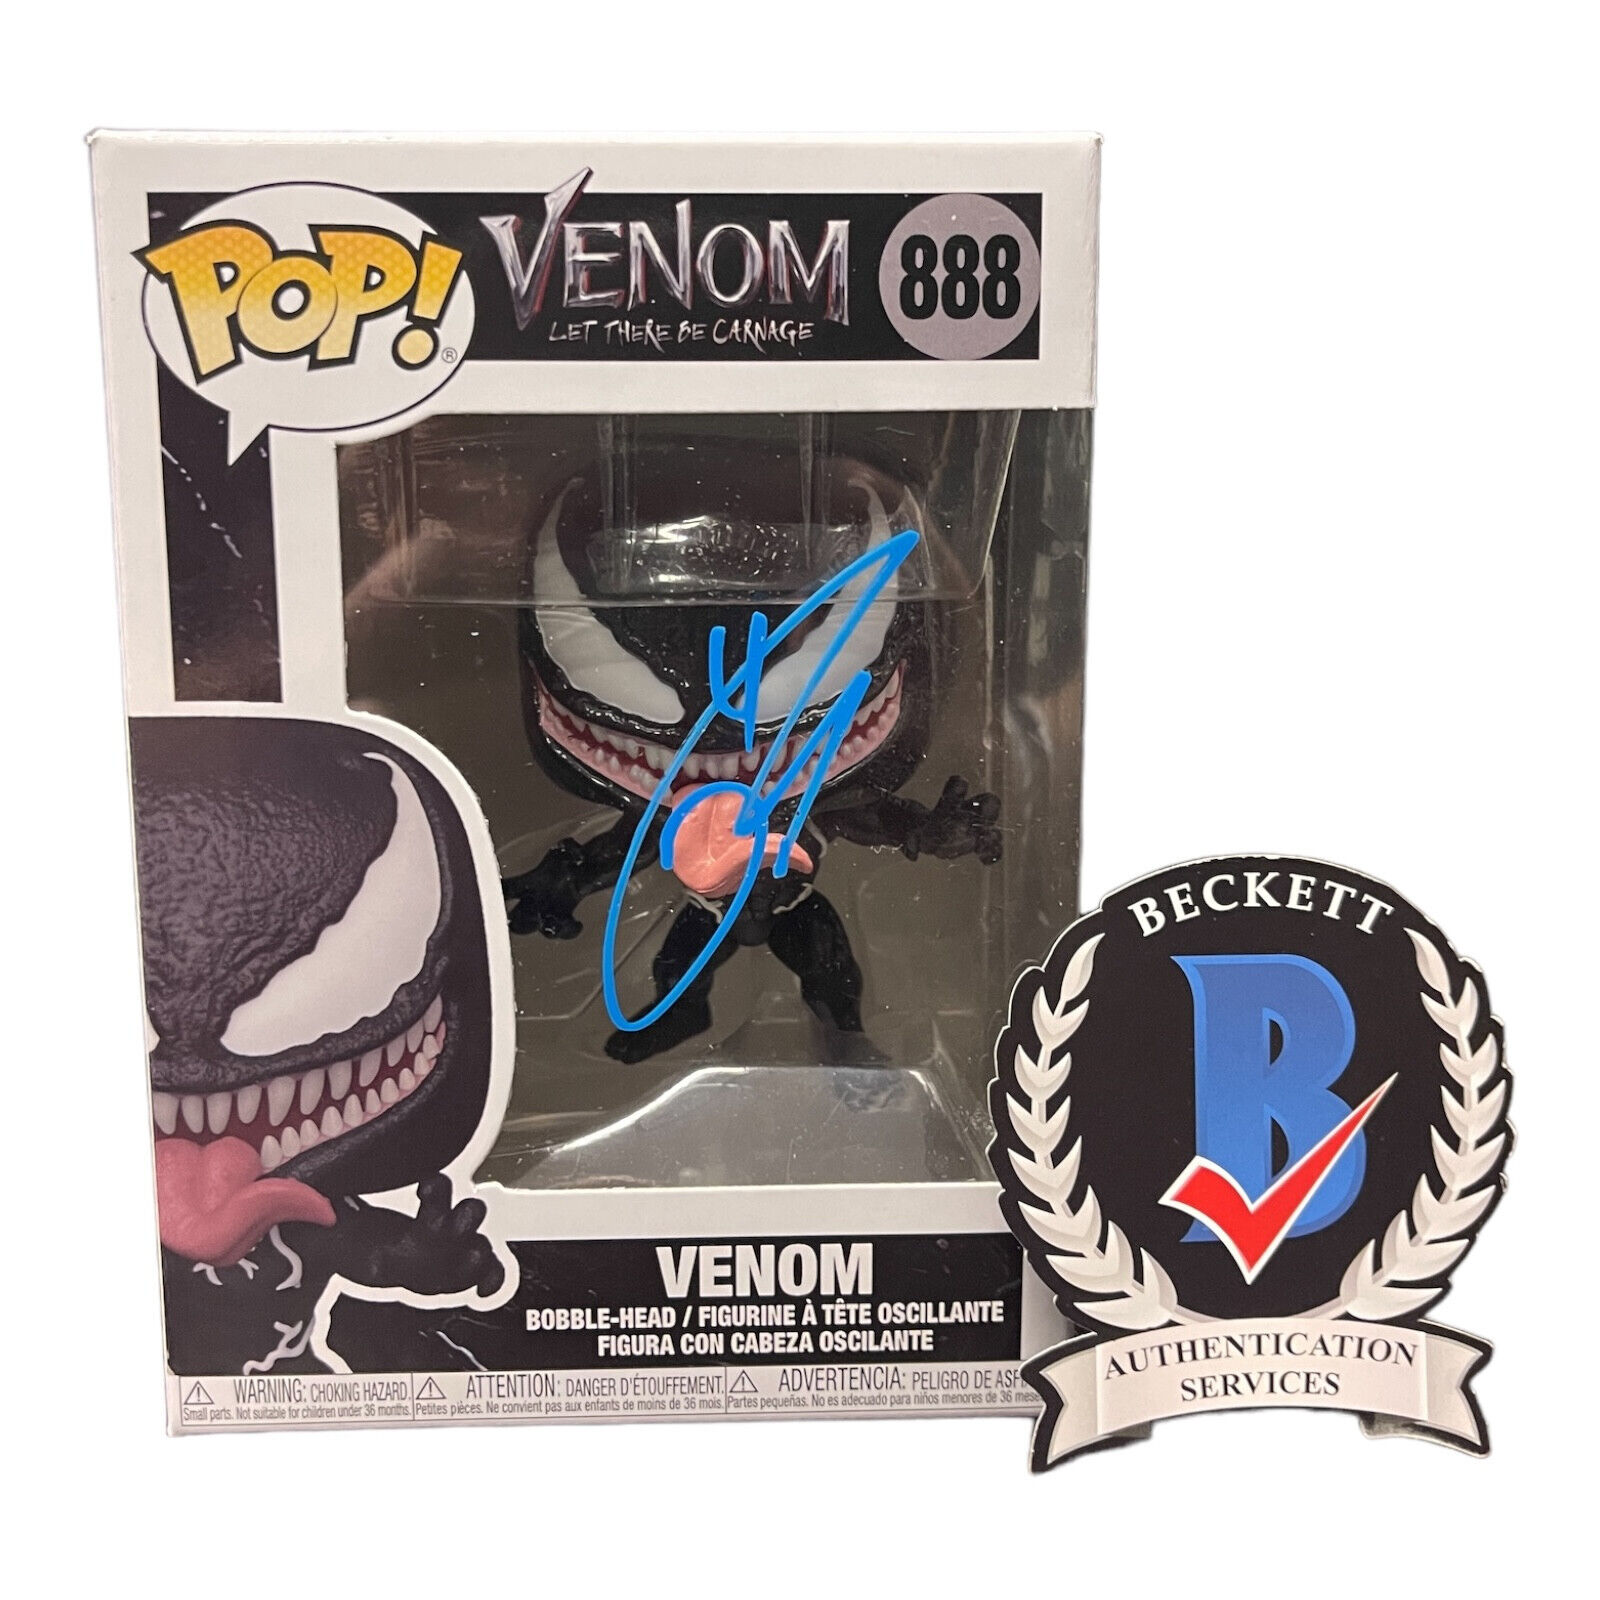 Tom Hardy Signed Autograph Venom Let There Be Carnage Funko Pop 888 Beckett BAS